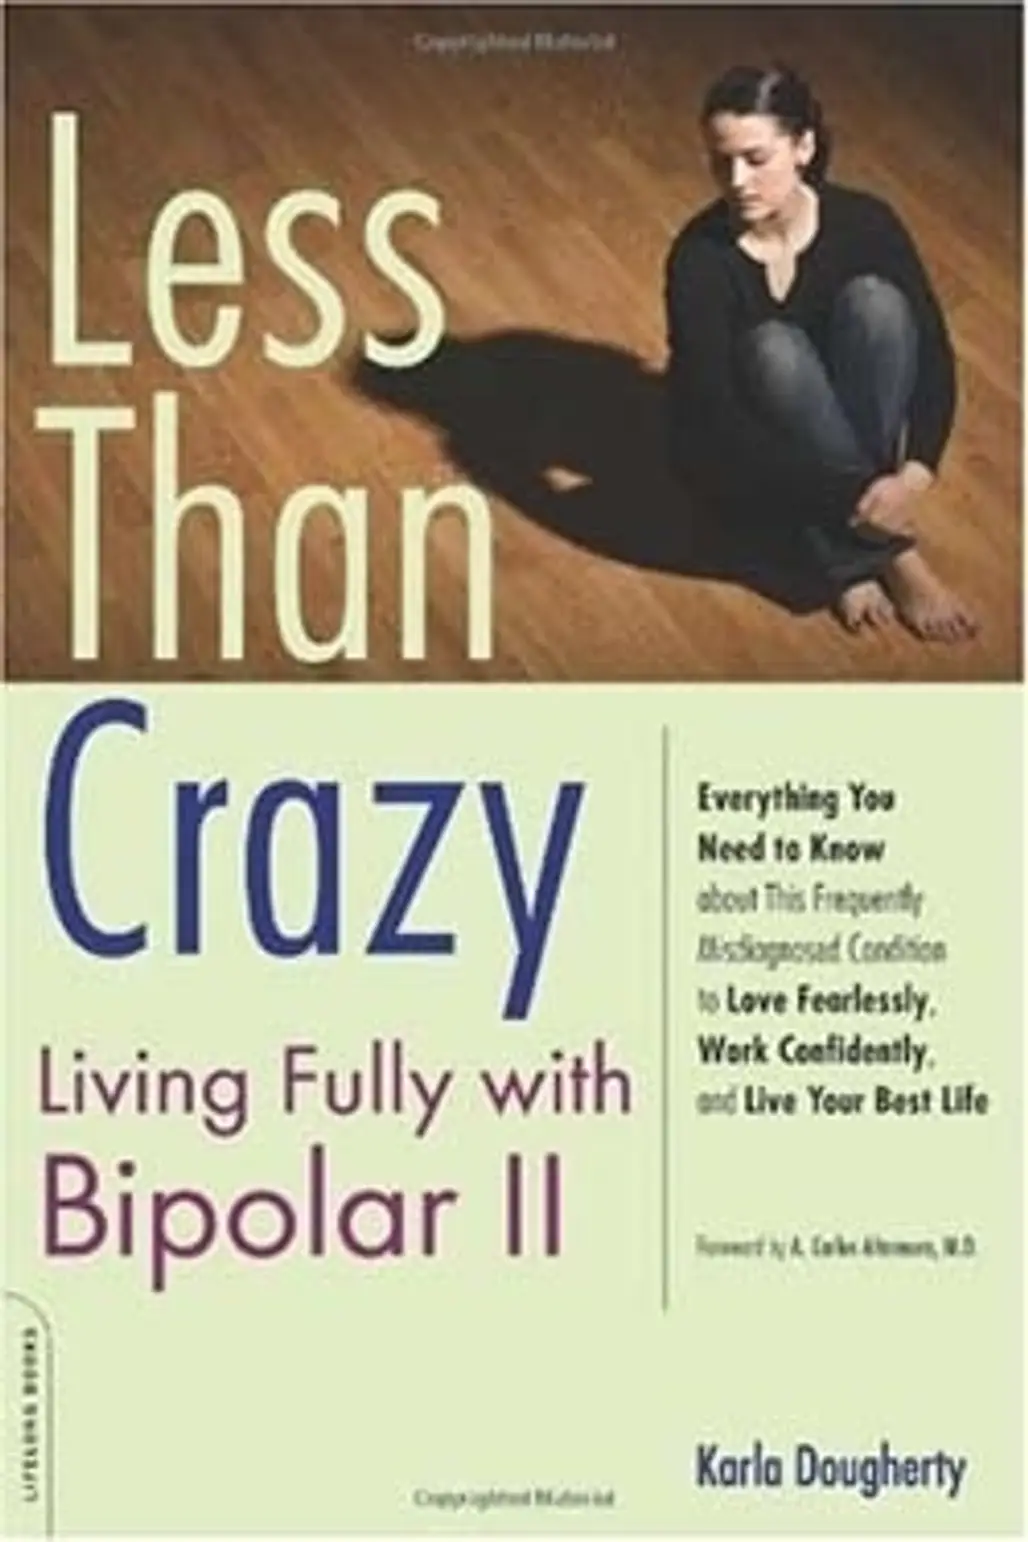 Less than Crazy: Living Fully with Bipolar 2 by Karla Dougherty